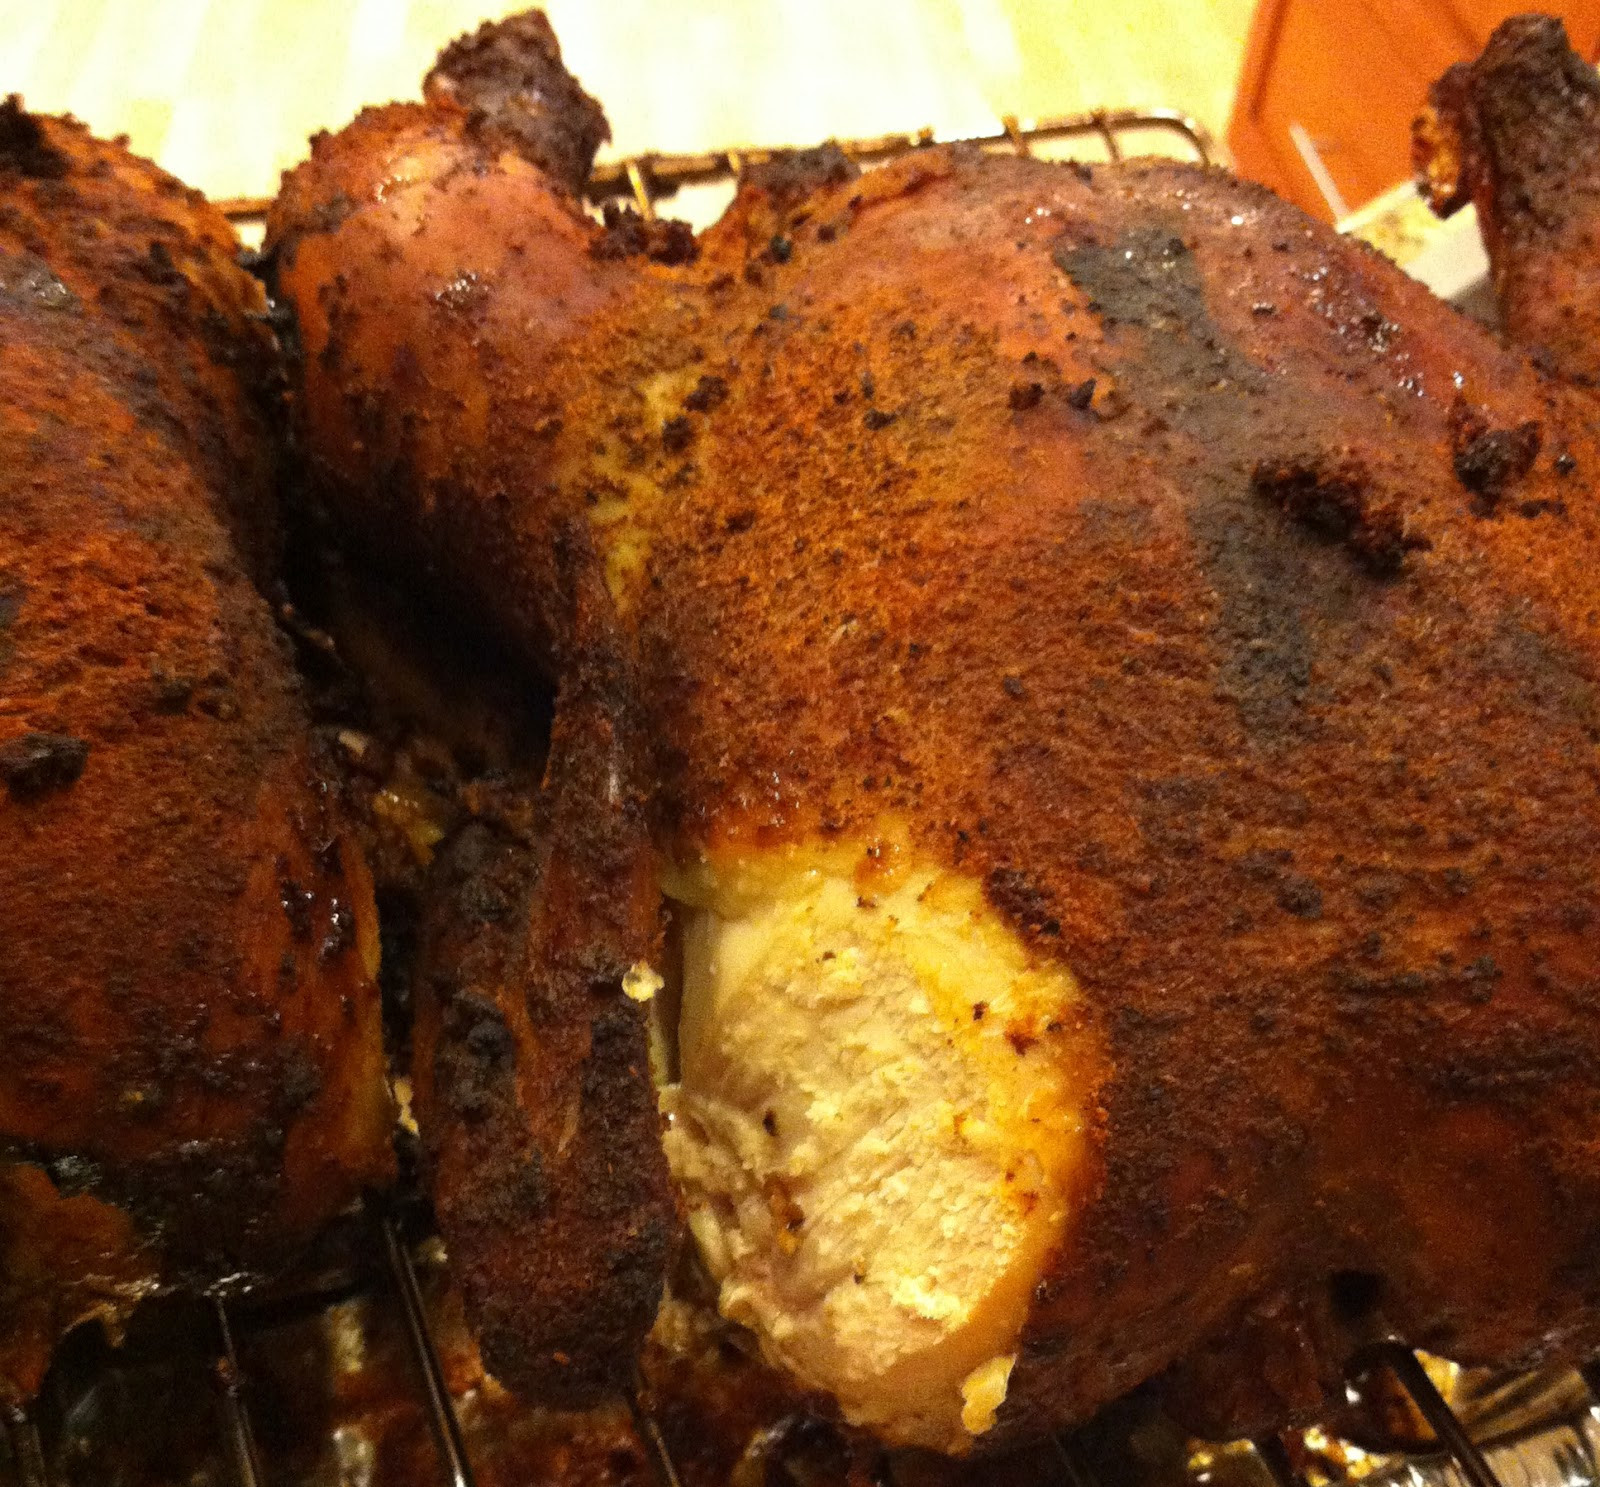 Smoking Whole Chicken In Masterbuilt Electric Smoker
 TASTE OF HAWAII RIBS AND CHICKEN COOKED IN MASTERBUILT